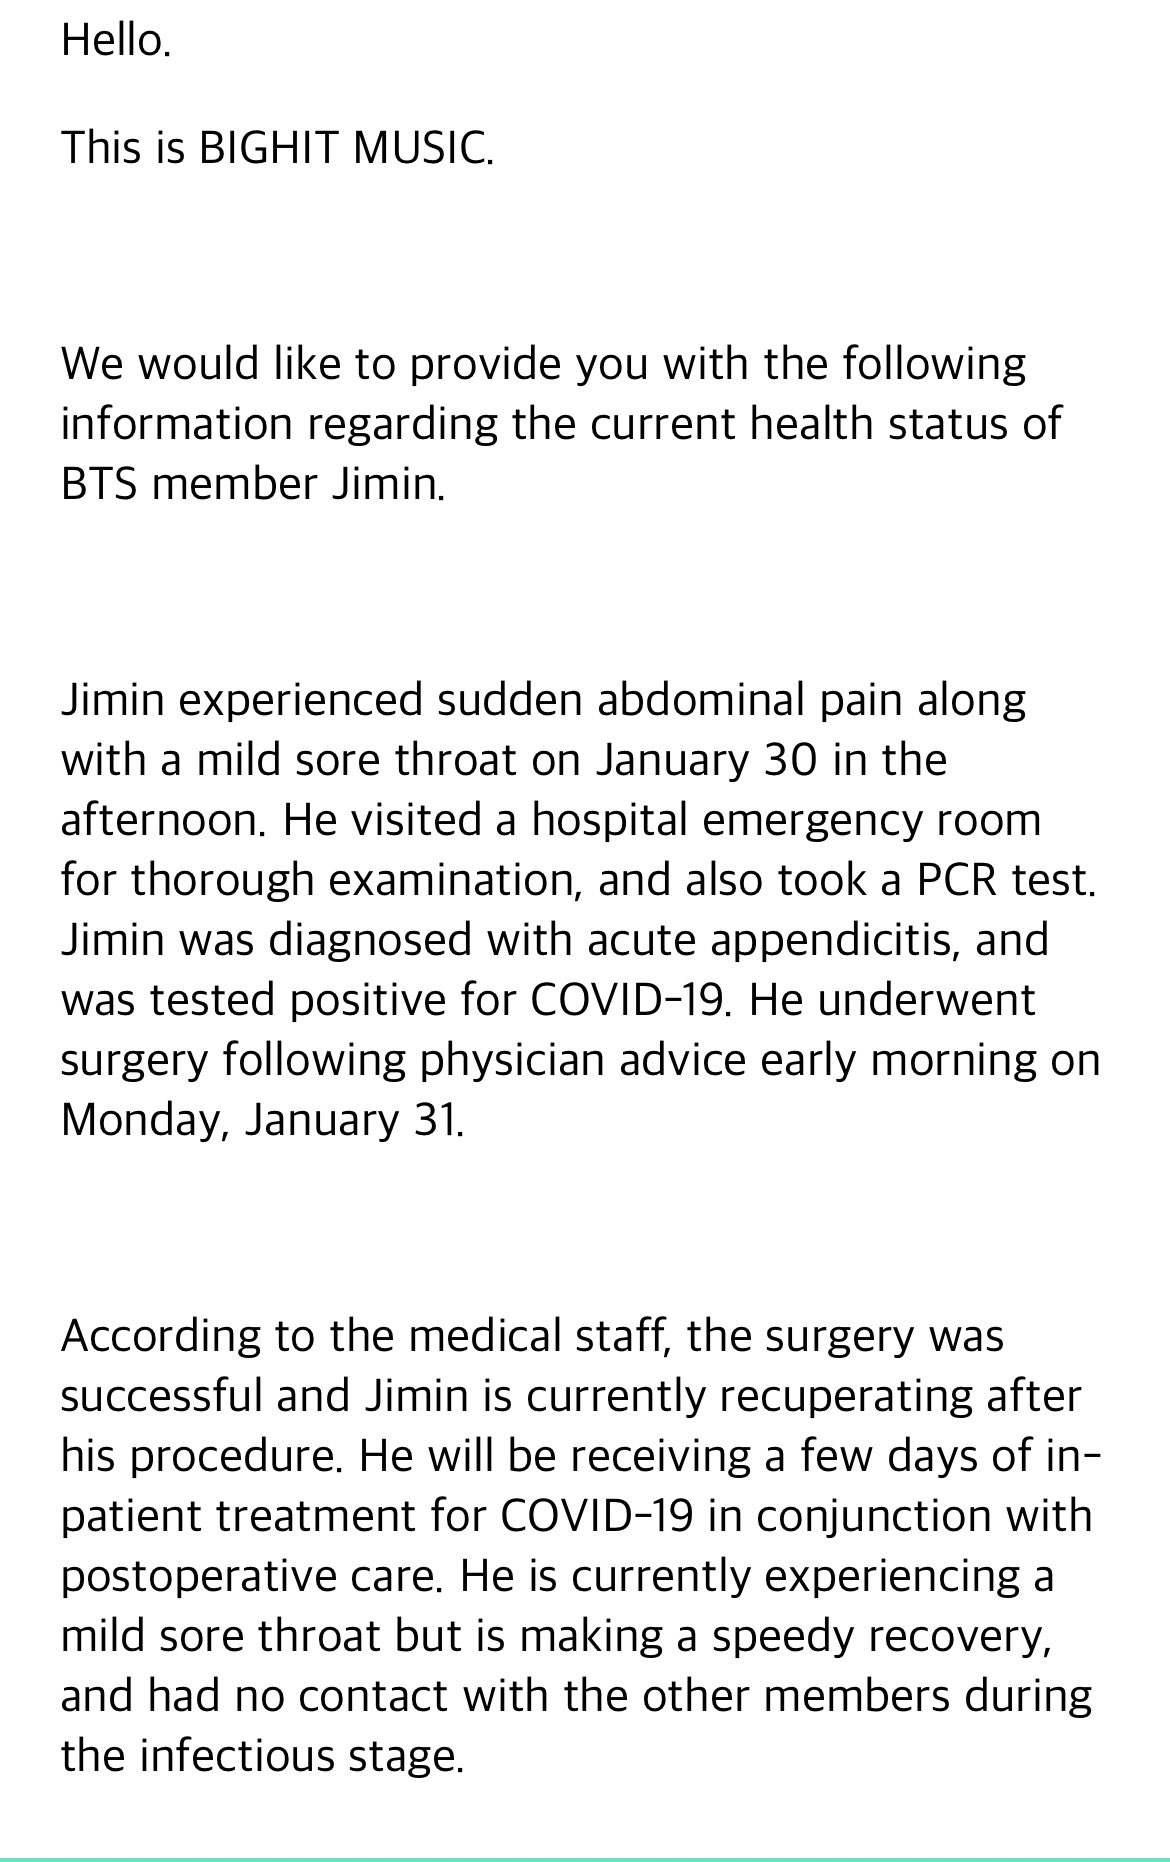 Jimin From Bts Tests Positive For Covid-19 After Operated For Acute Appendicitis, Yours Truly, News, August 17, 2022